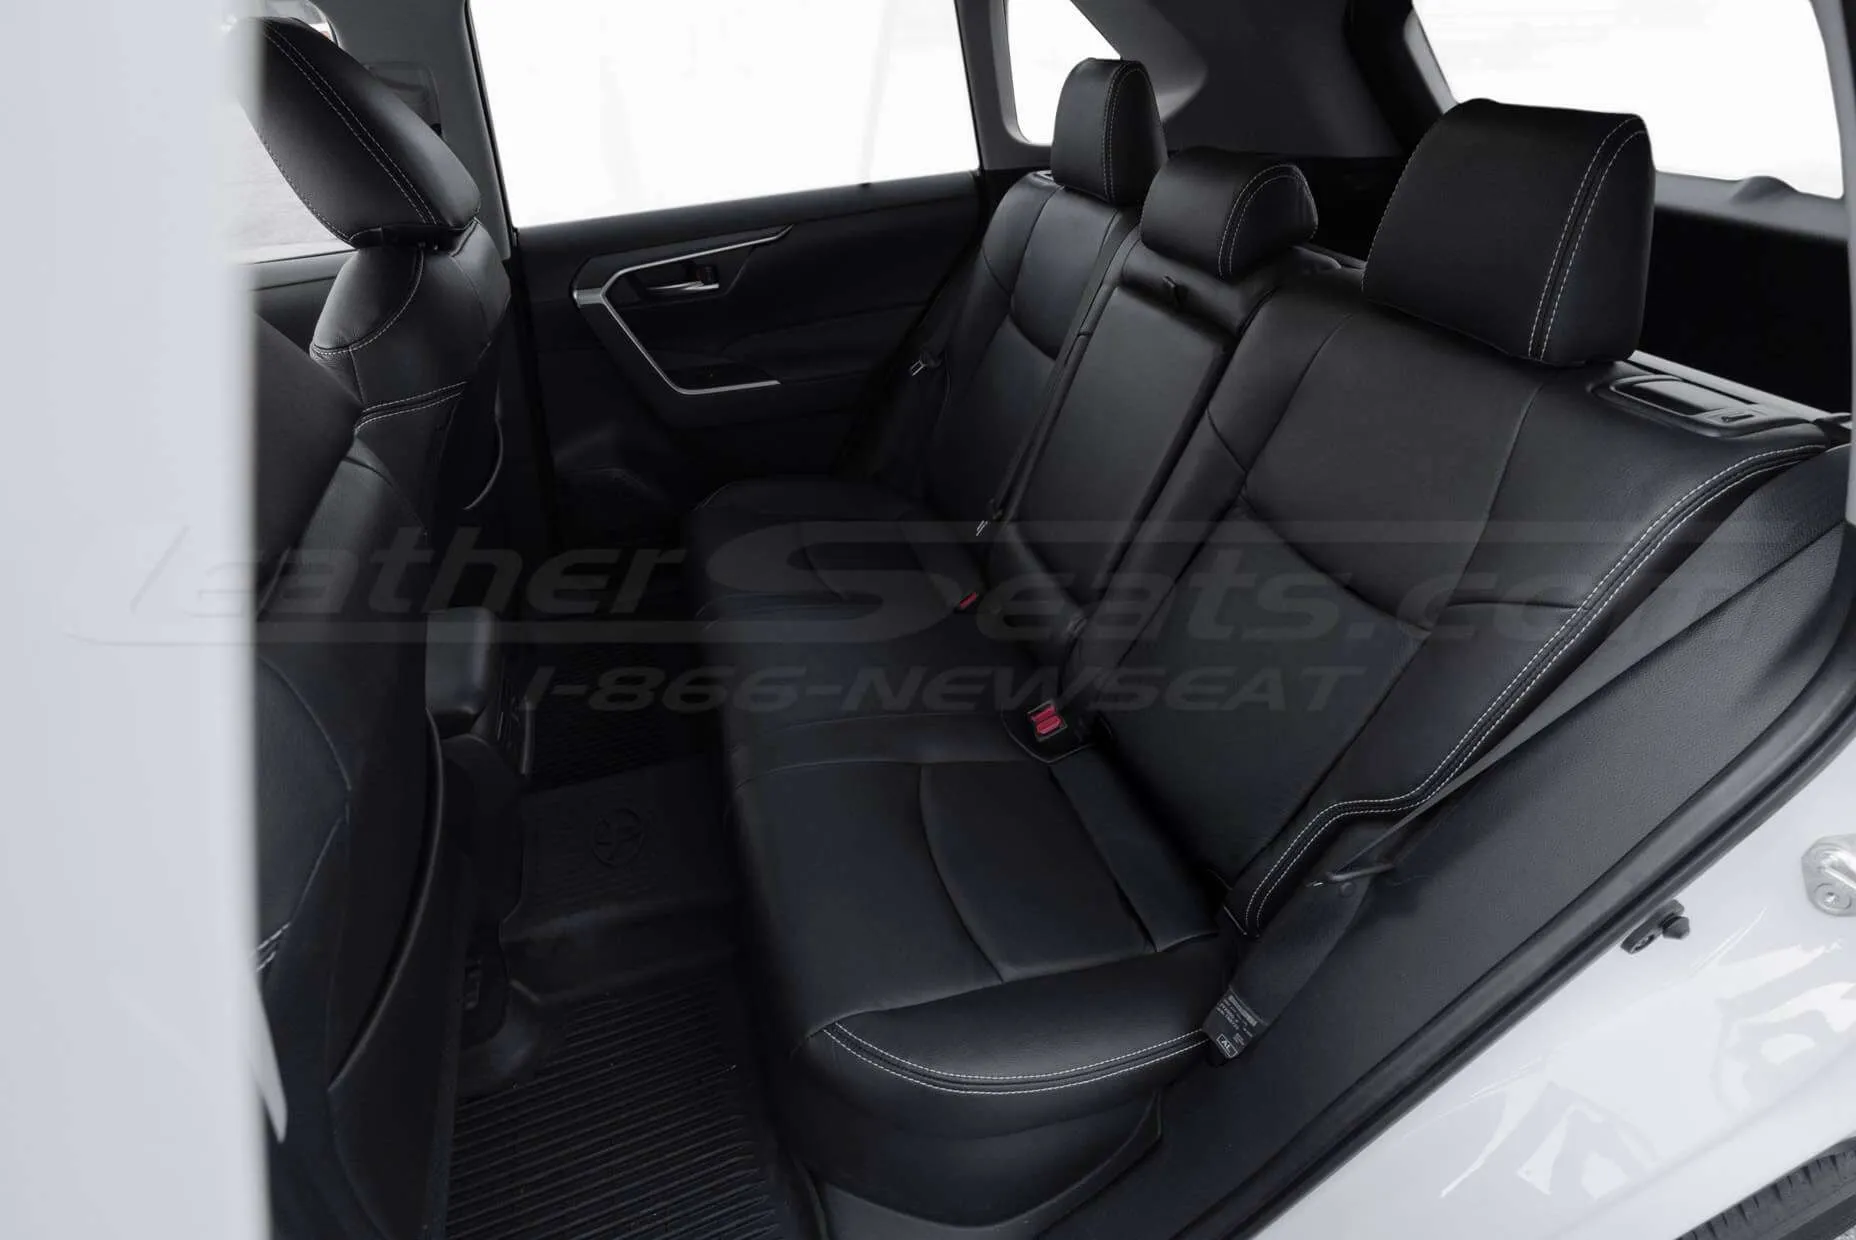 Custom Black leather seats for Toyota RAV4 - Rear seats from driver side